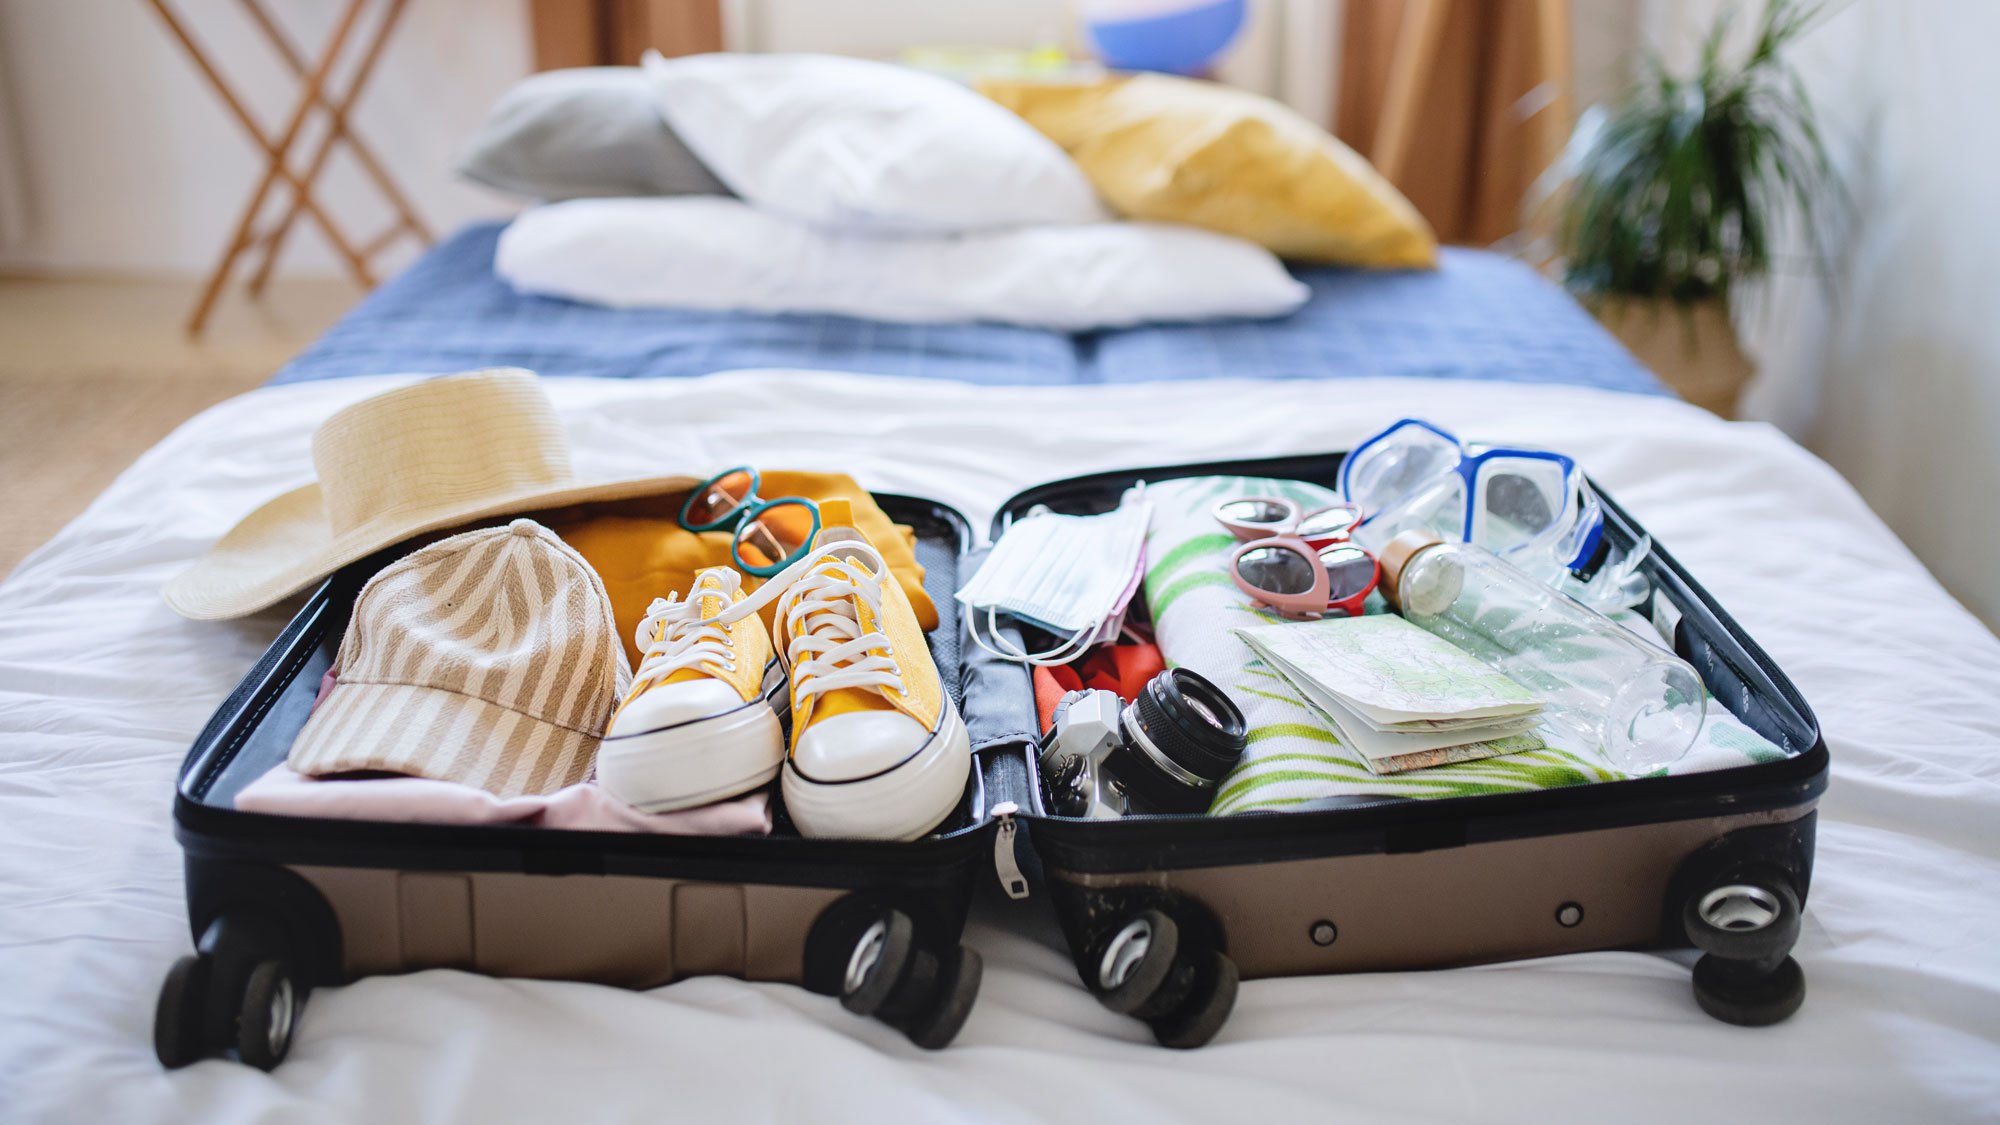 An open suitcase on the bed being packed for summer vacation